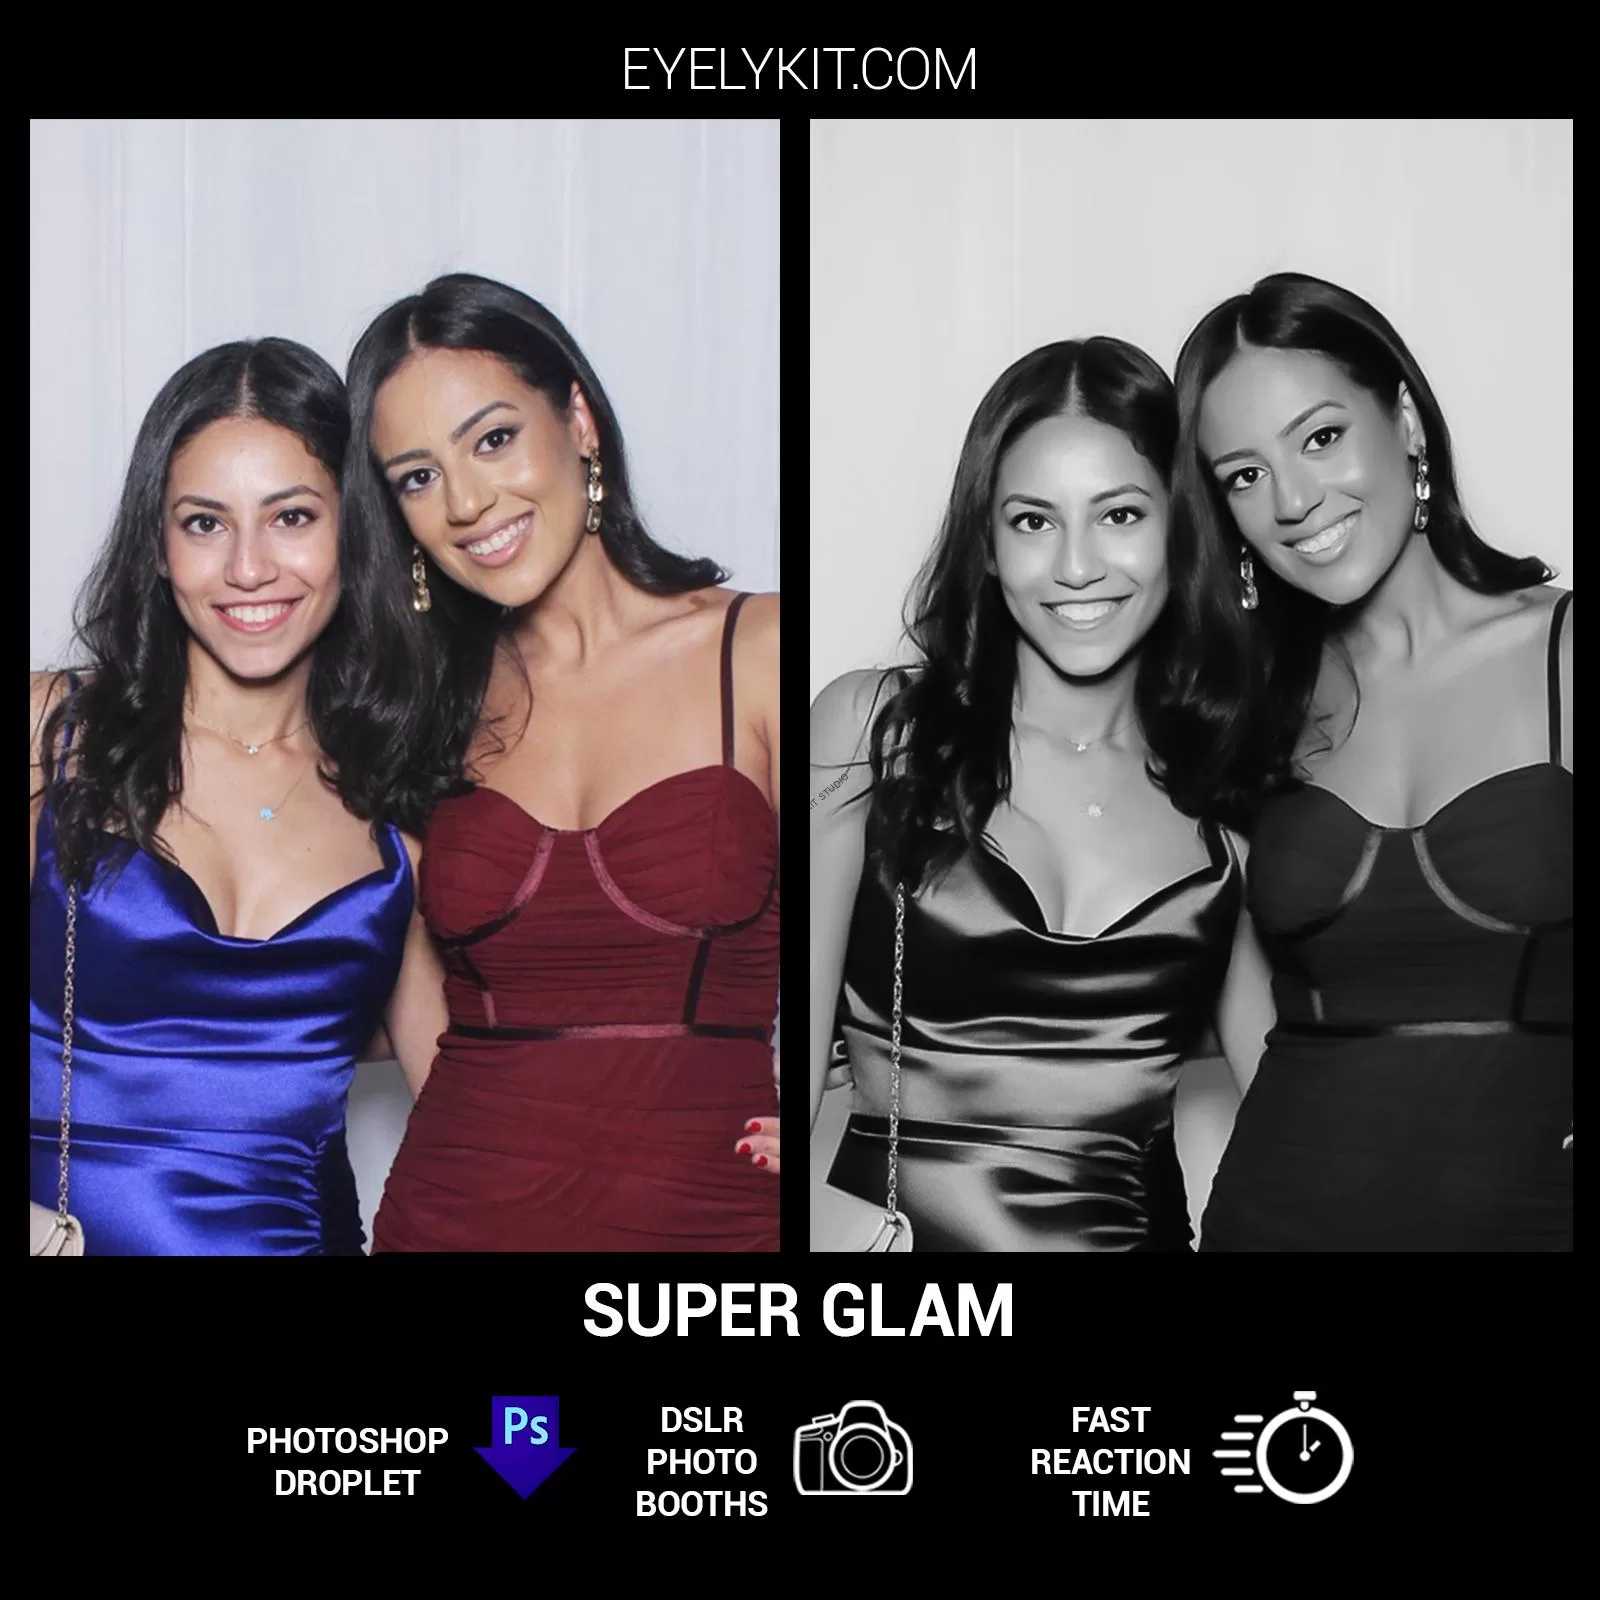 Photo Booth Droplet - SUPER GLAM - PERFECT SKIN